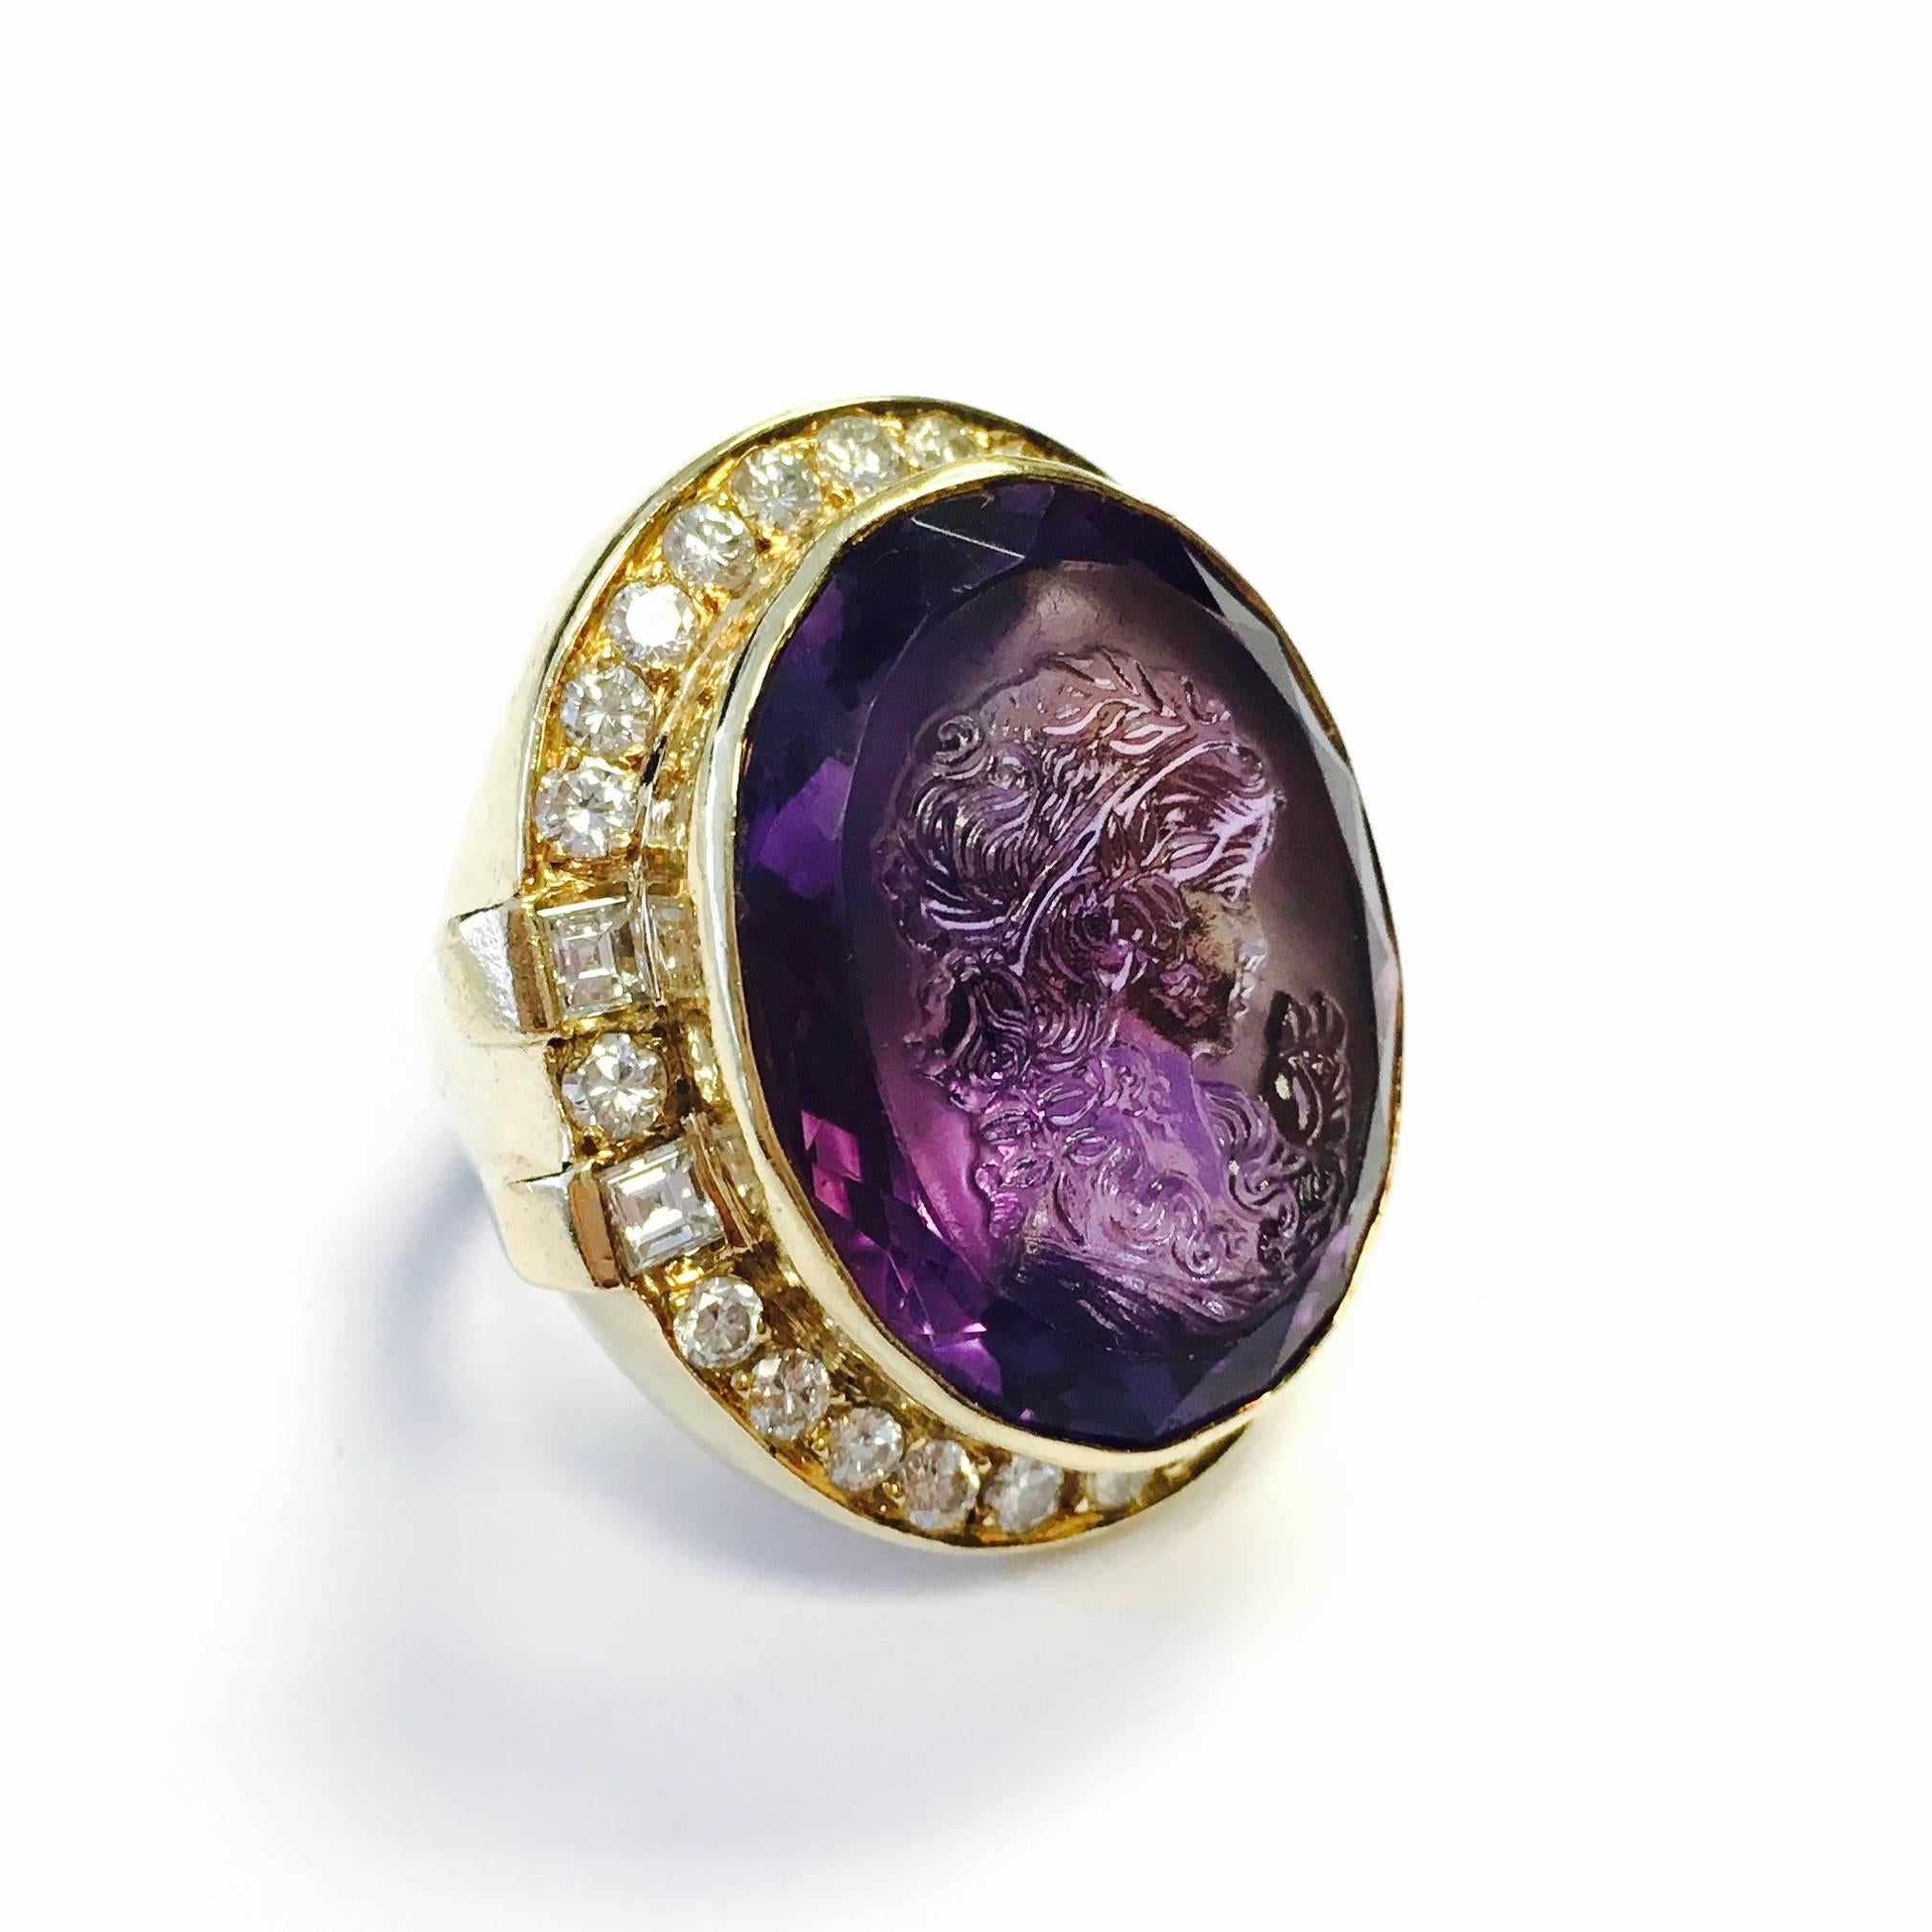 Gorgeous, unusual coctail ring, crafted in 14K yellow gold, featuring an approximately 25ct amethyst cameo, surrounded by a bezel of diamonds, supported by solid gold under gallery and a 4.5 mm wide band.
Diamond weight: 2.00ctw.  Color: G-H,